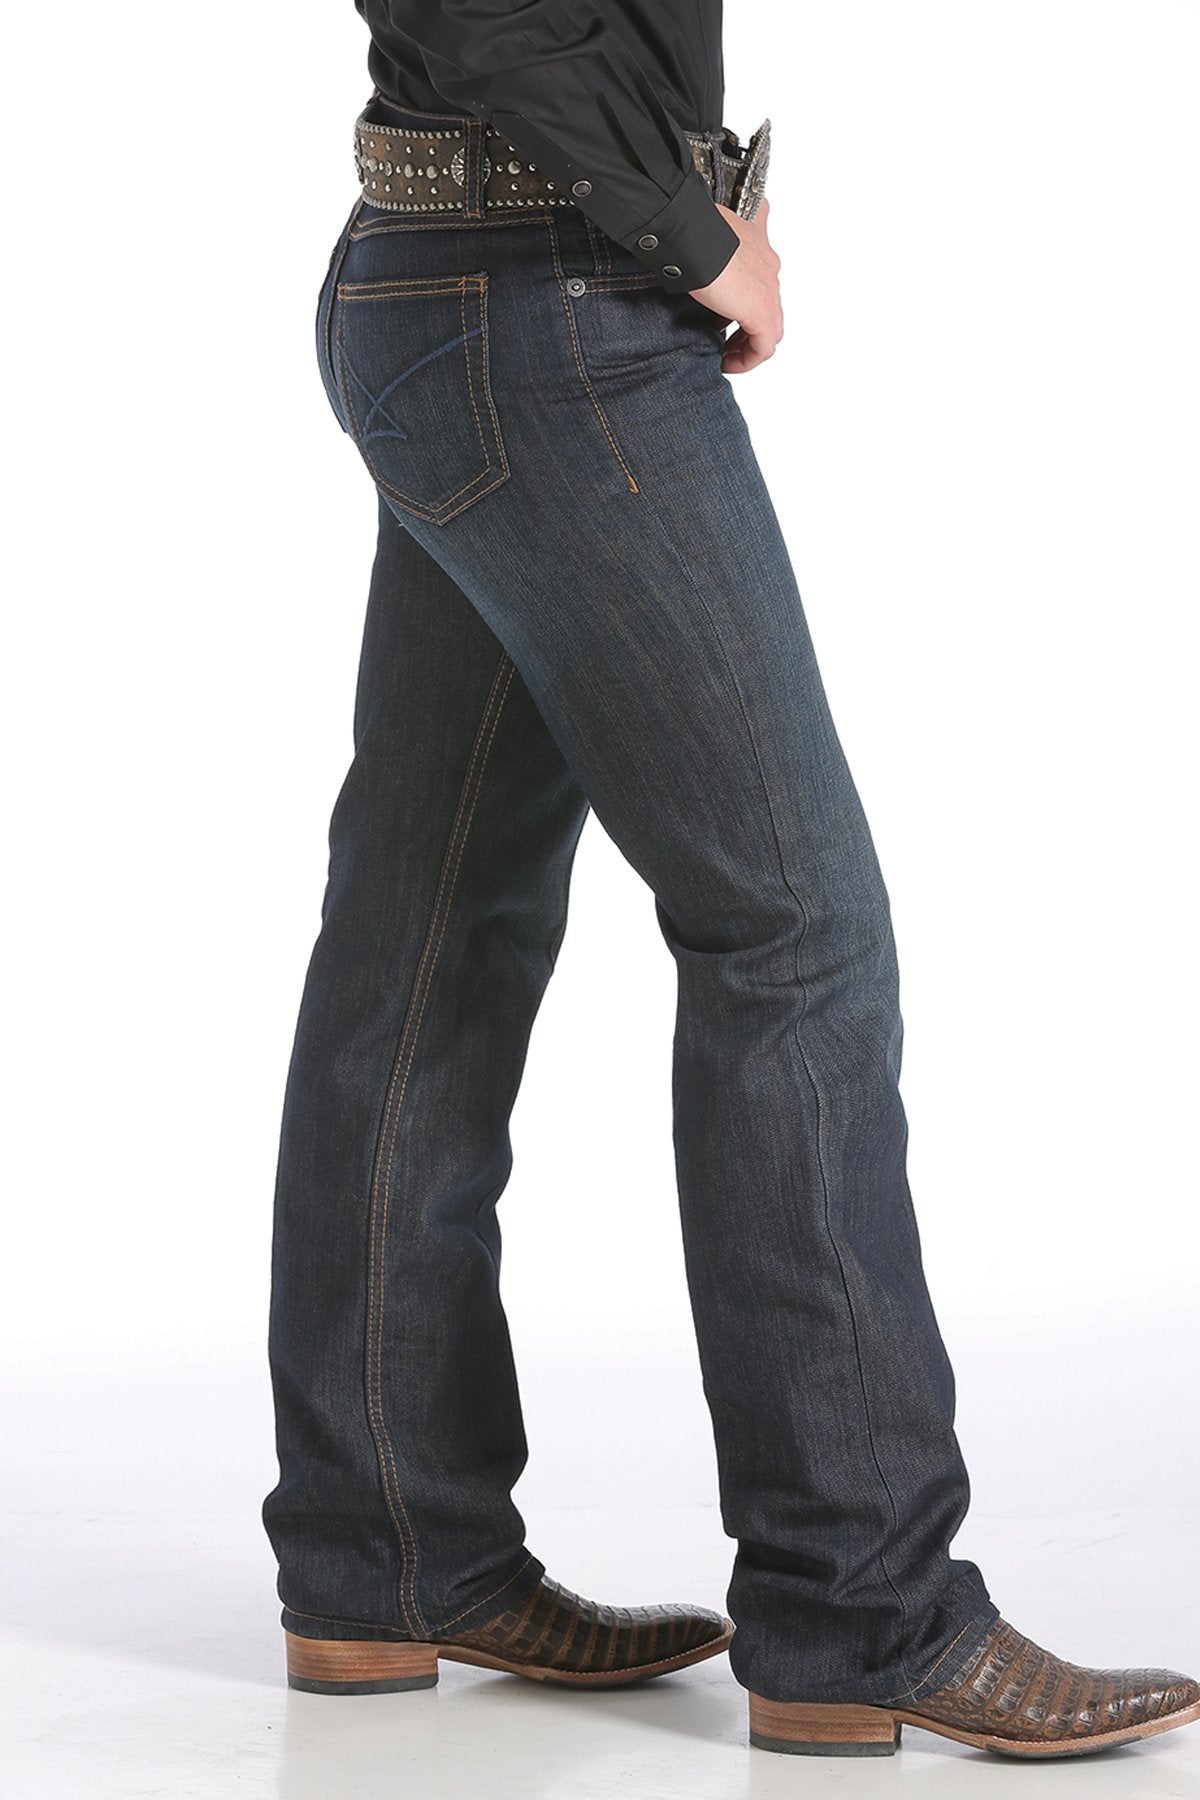 Cinch Ladies Jenna Relaxed Fit Jeans - MJ80152071